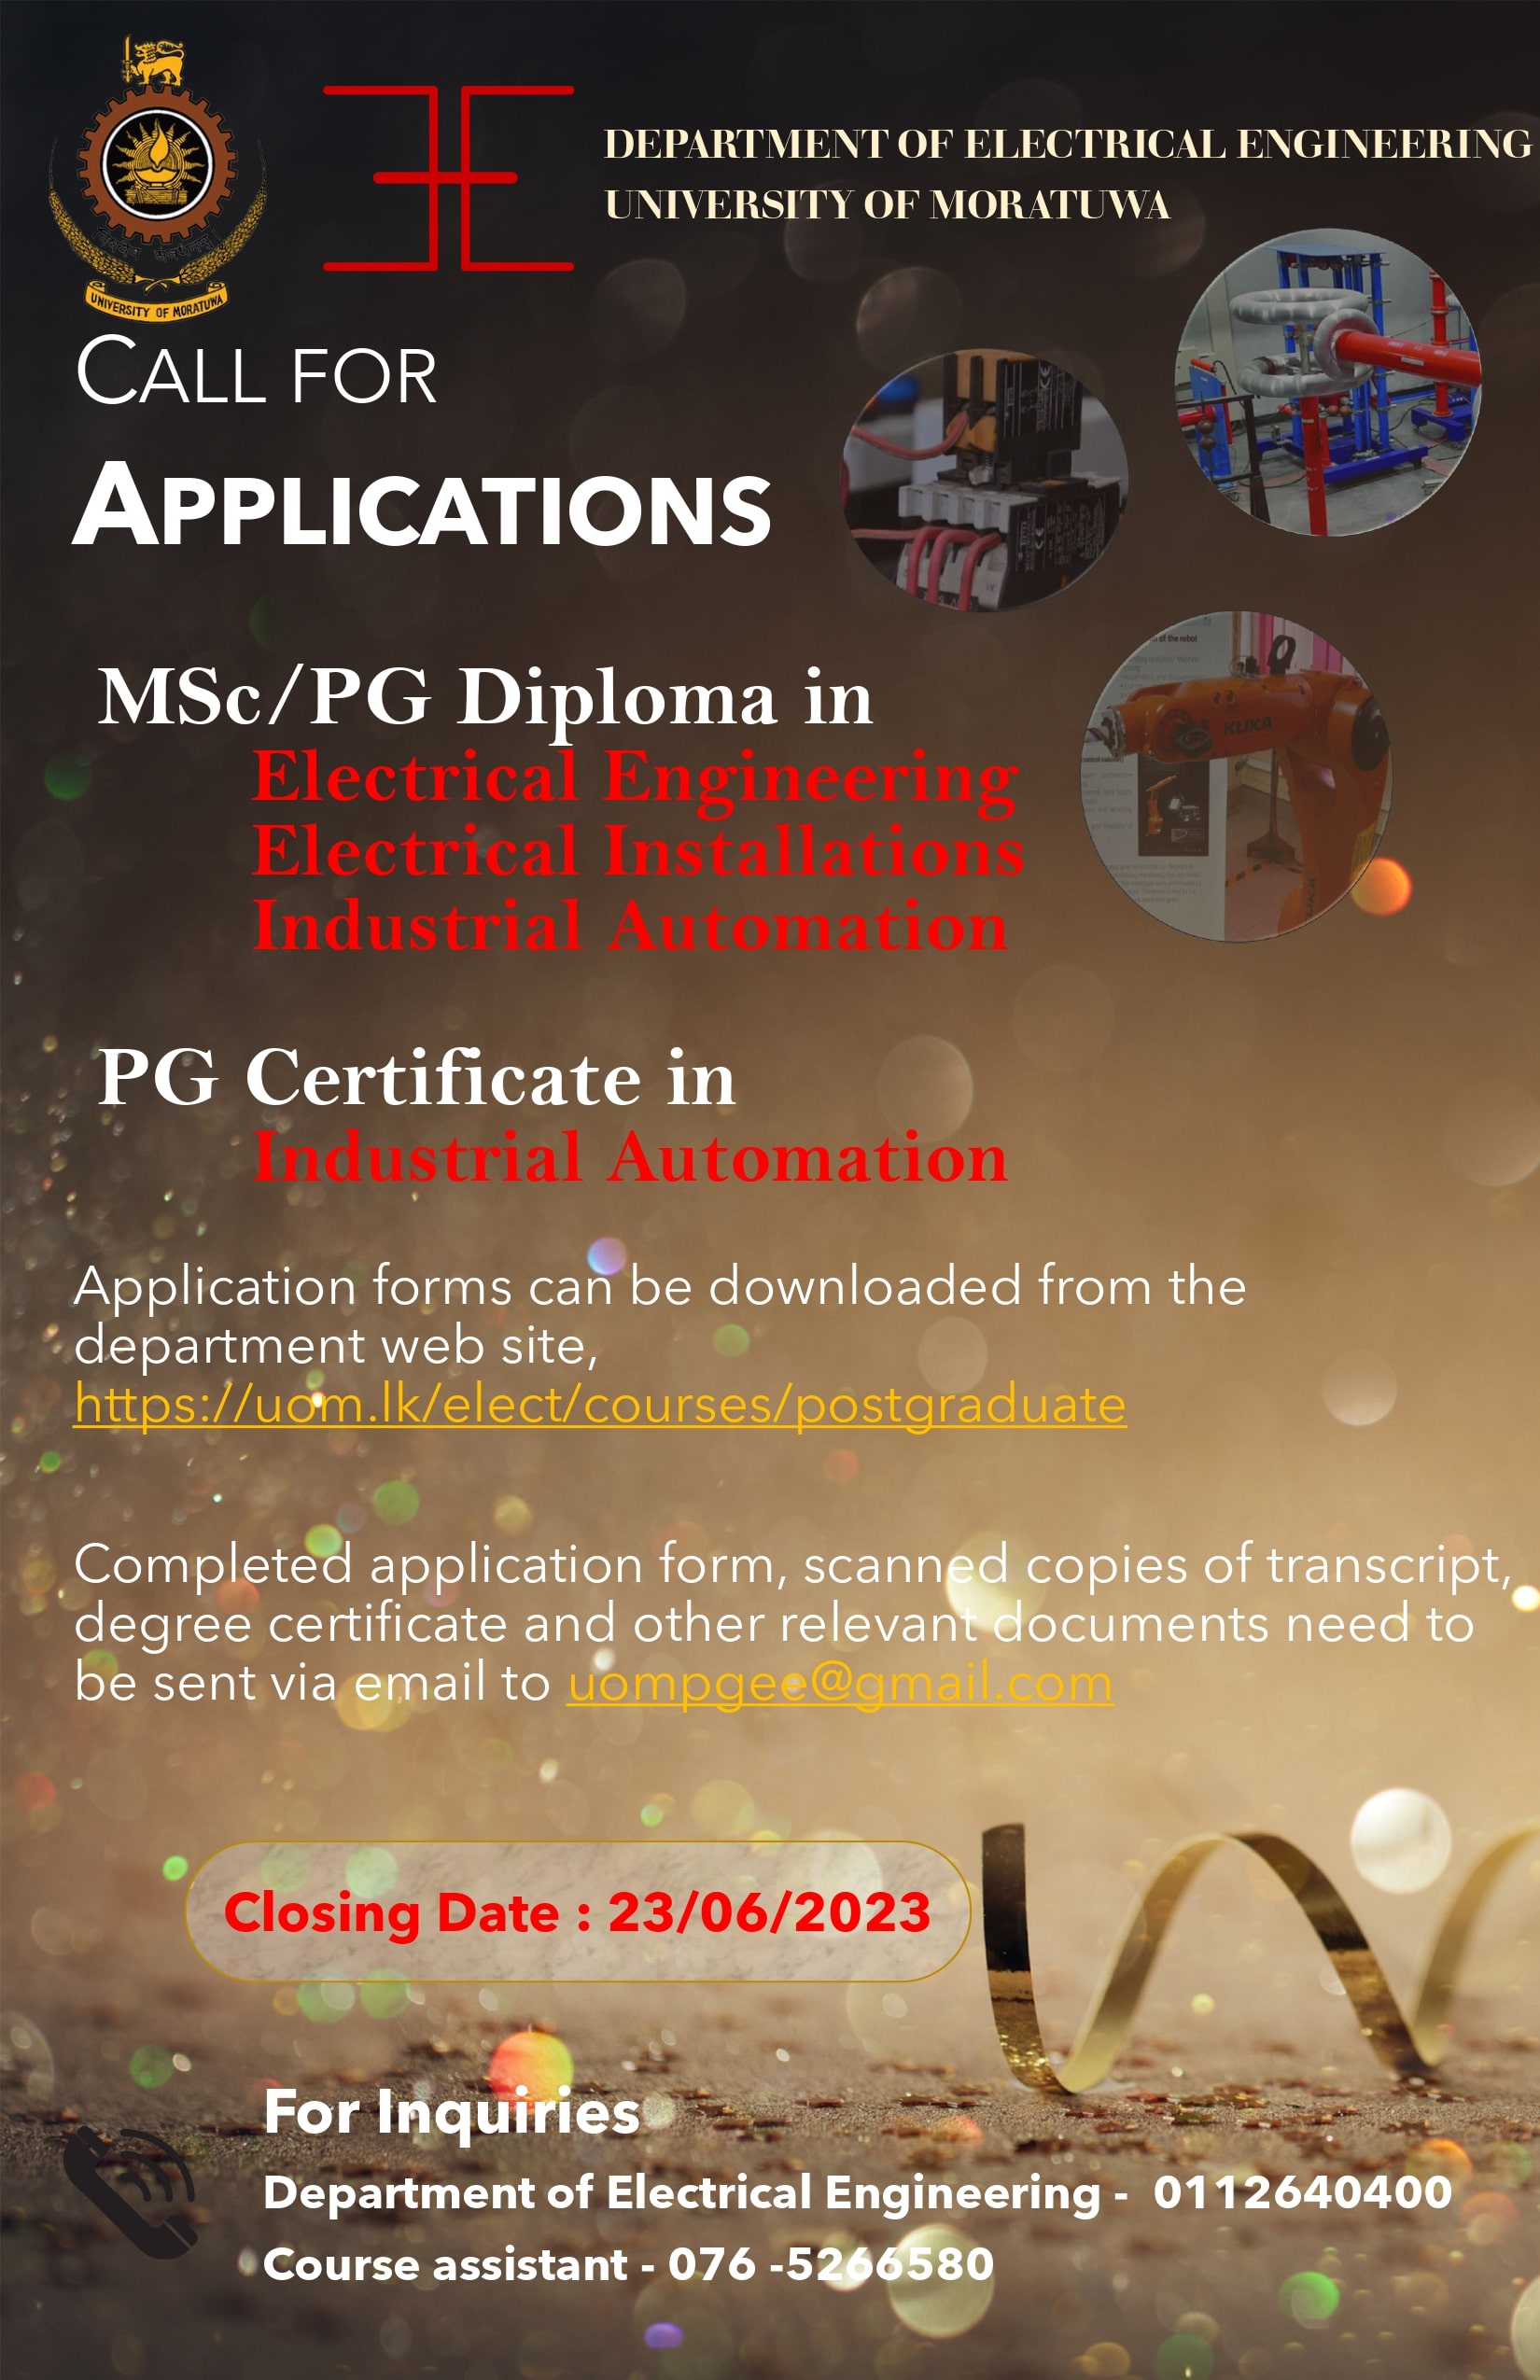 MSc/PG Diploma in Electrical Engineering, Electrical Installations, Industrial Automation